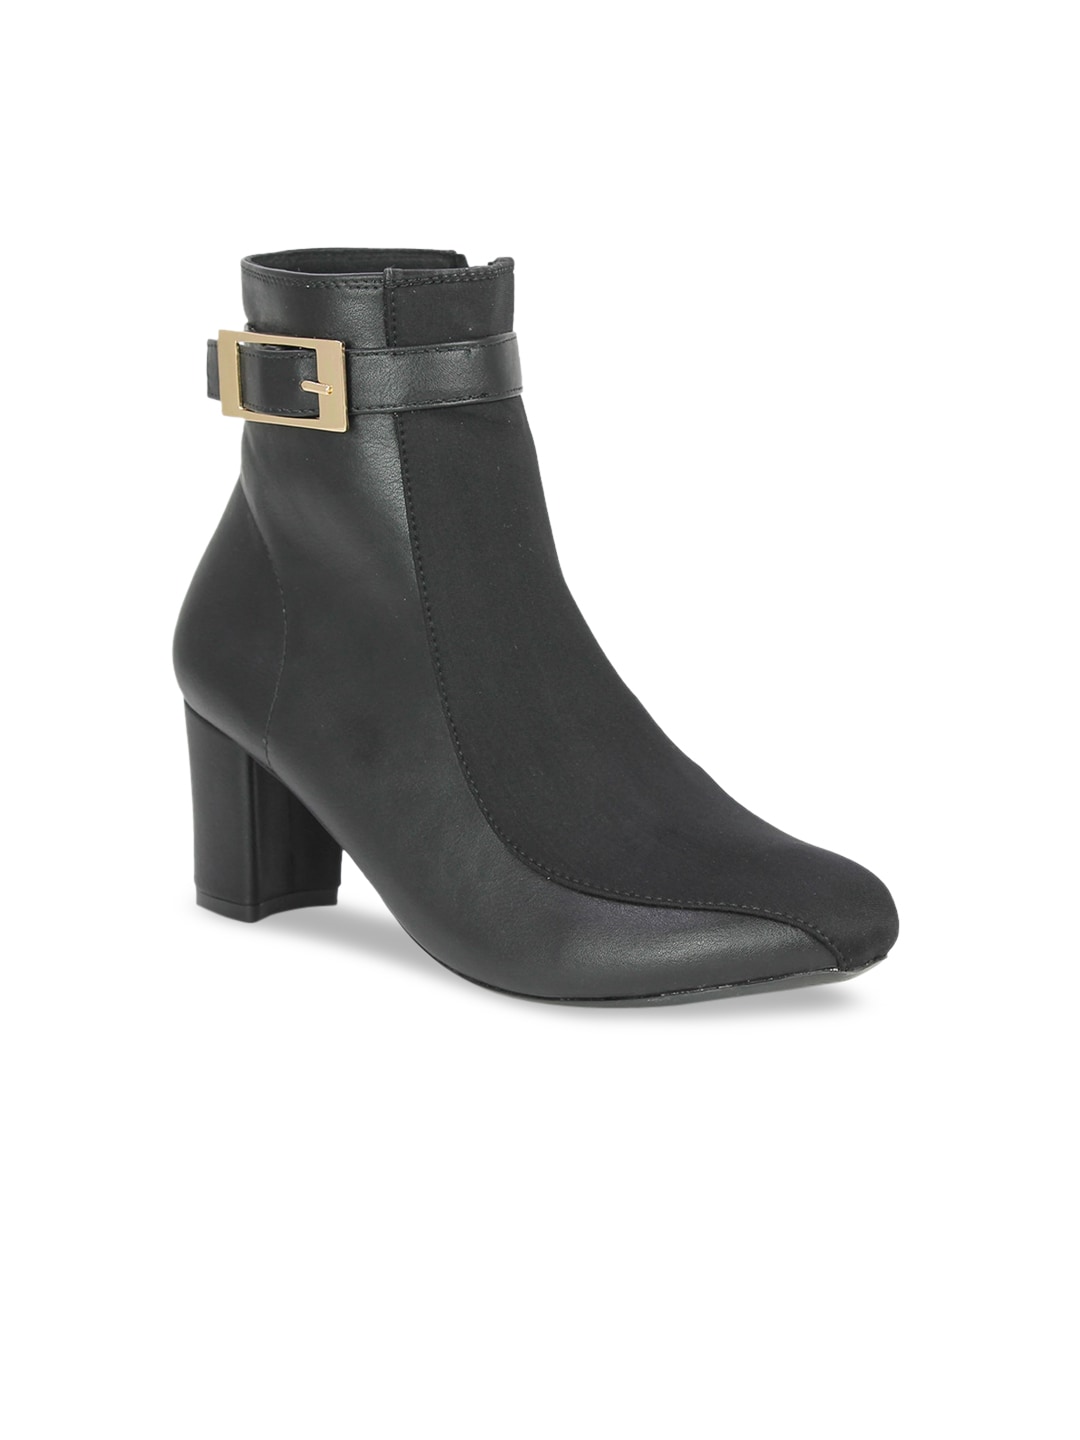 Inc 5 Women Black Solid Heeled Boots Price in India